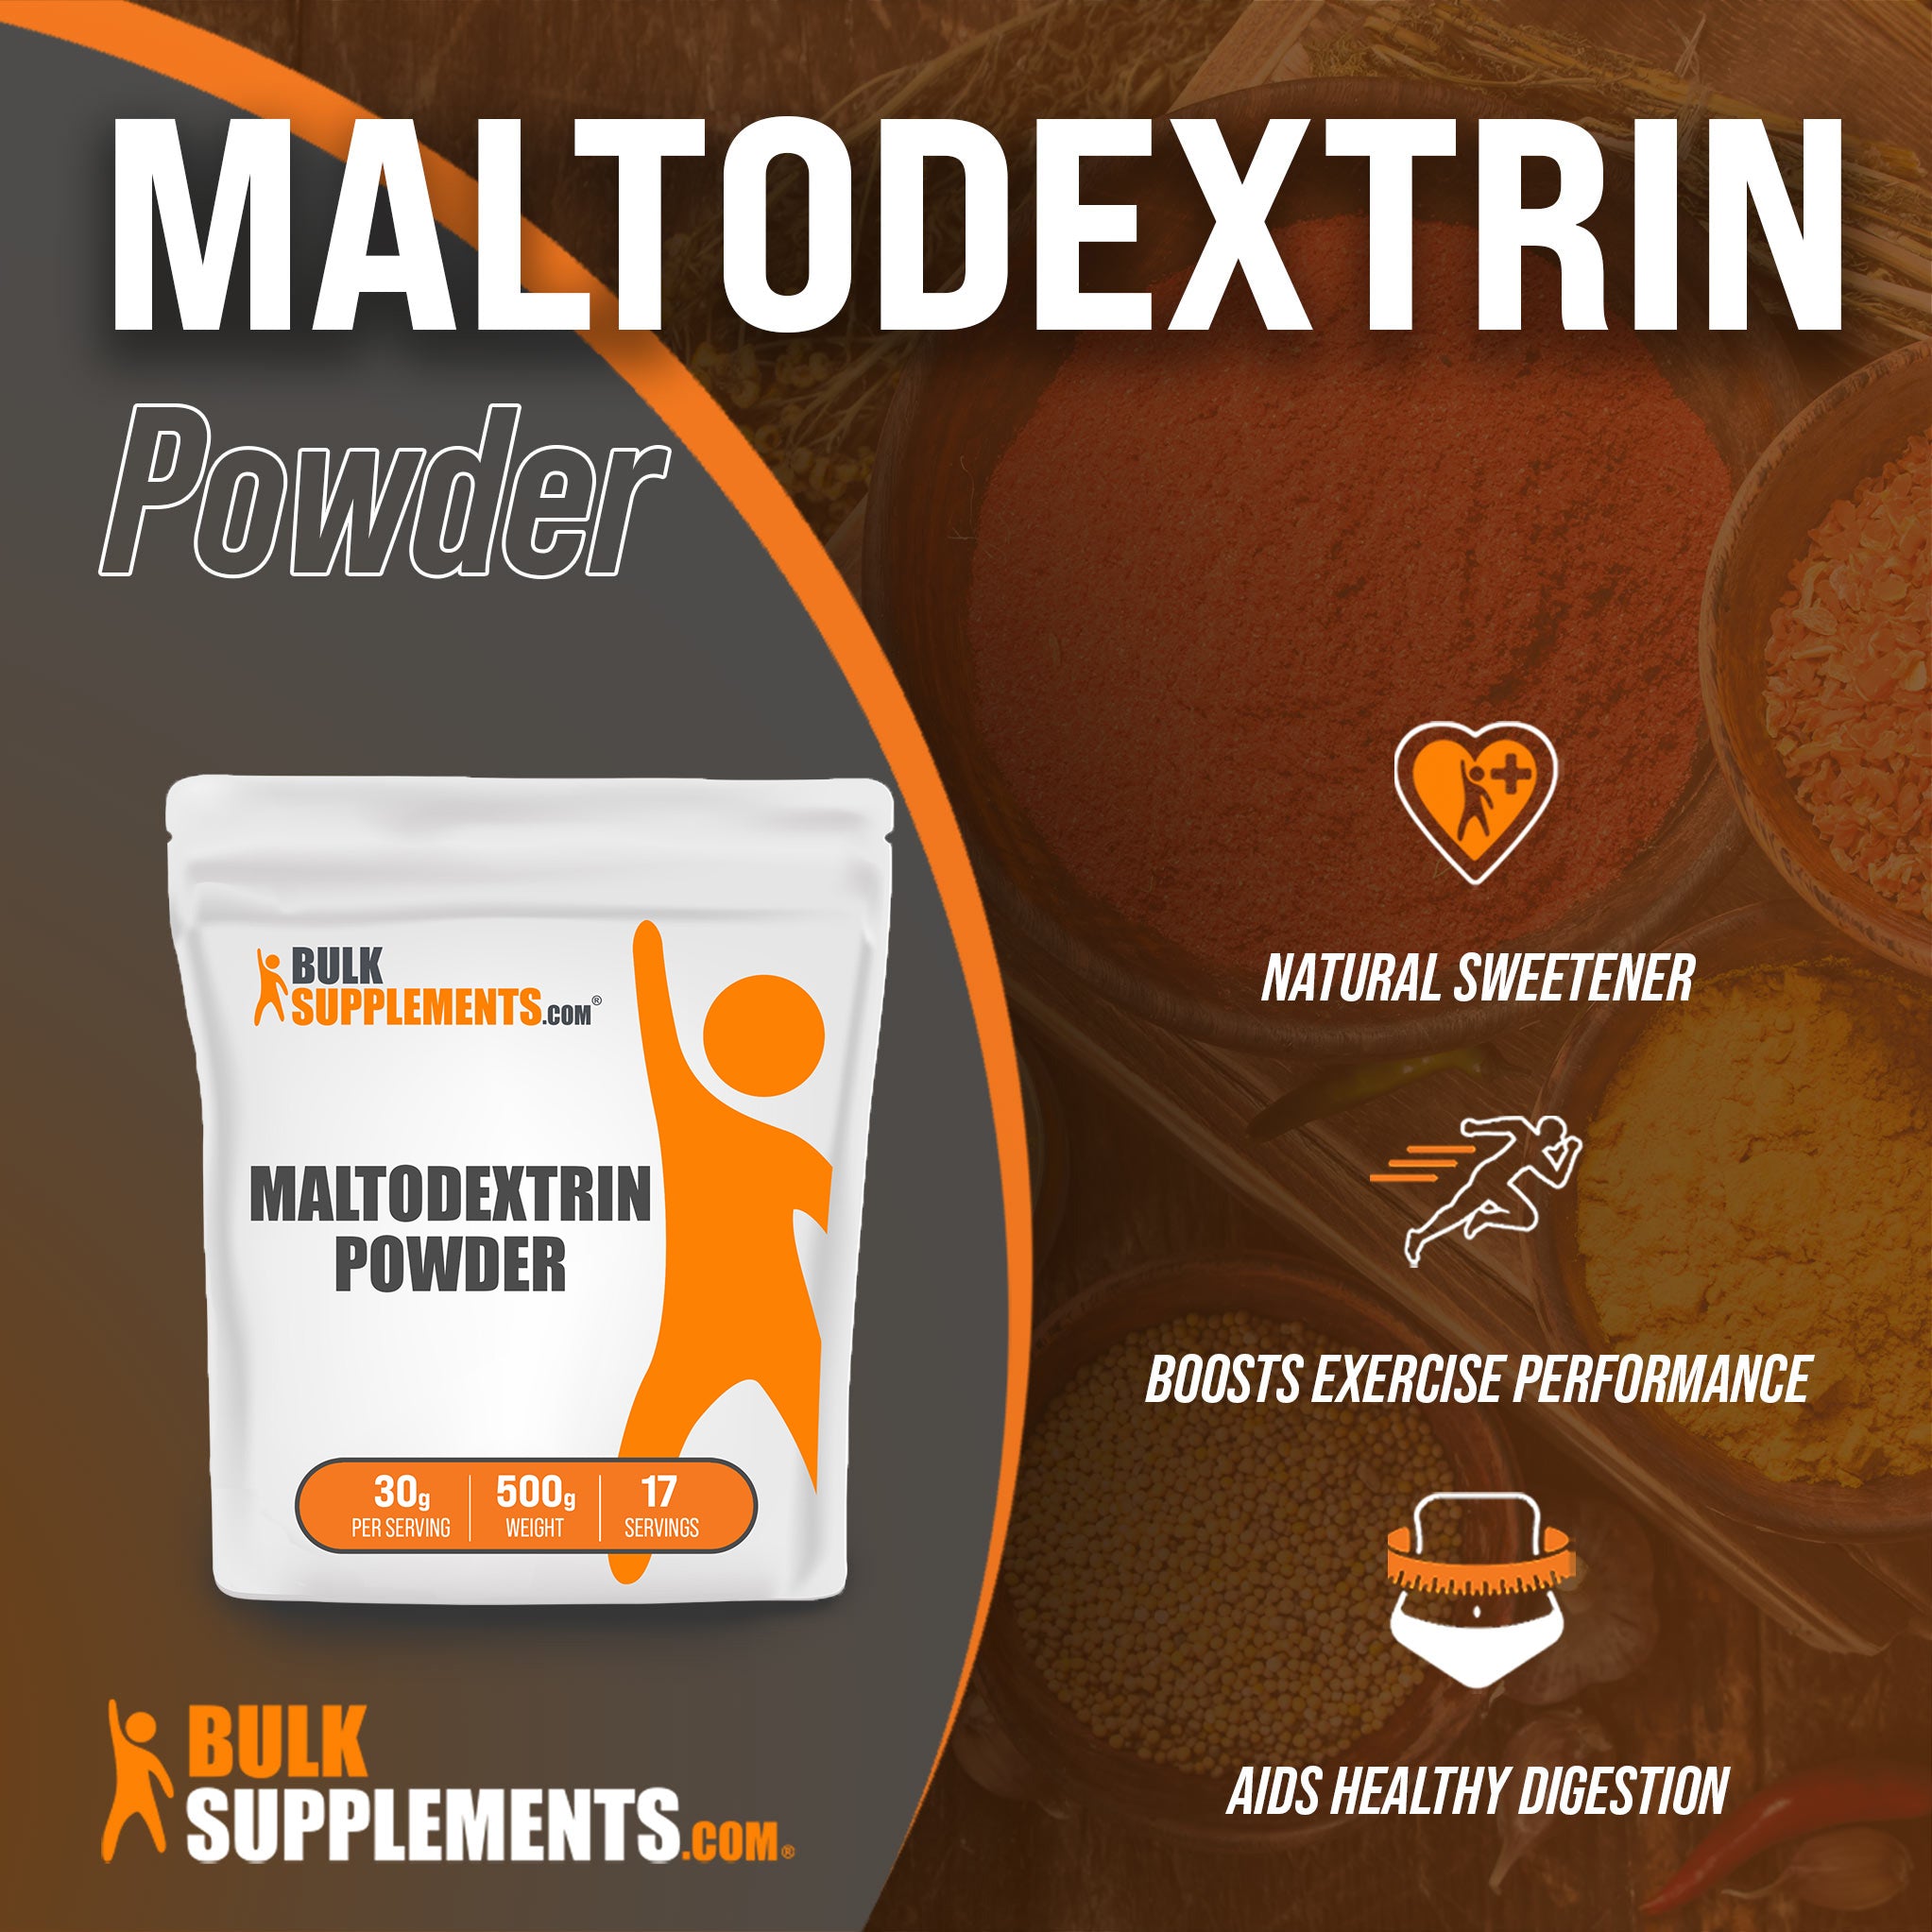 Benefits of Maltodextrin: natural sweetener, boosts exercise performance, aids healthy digestion